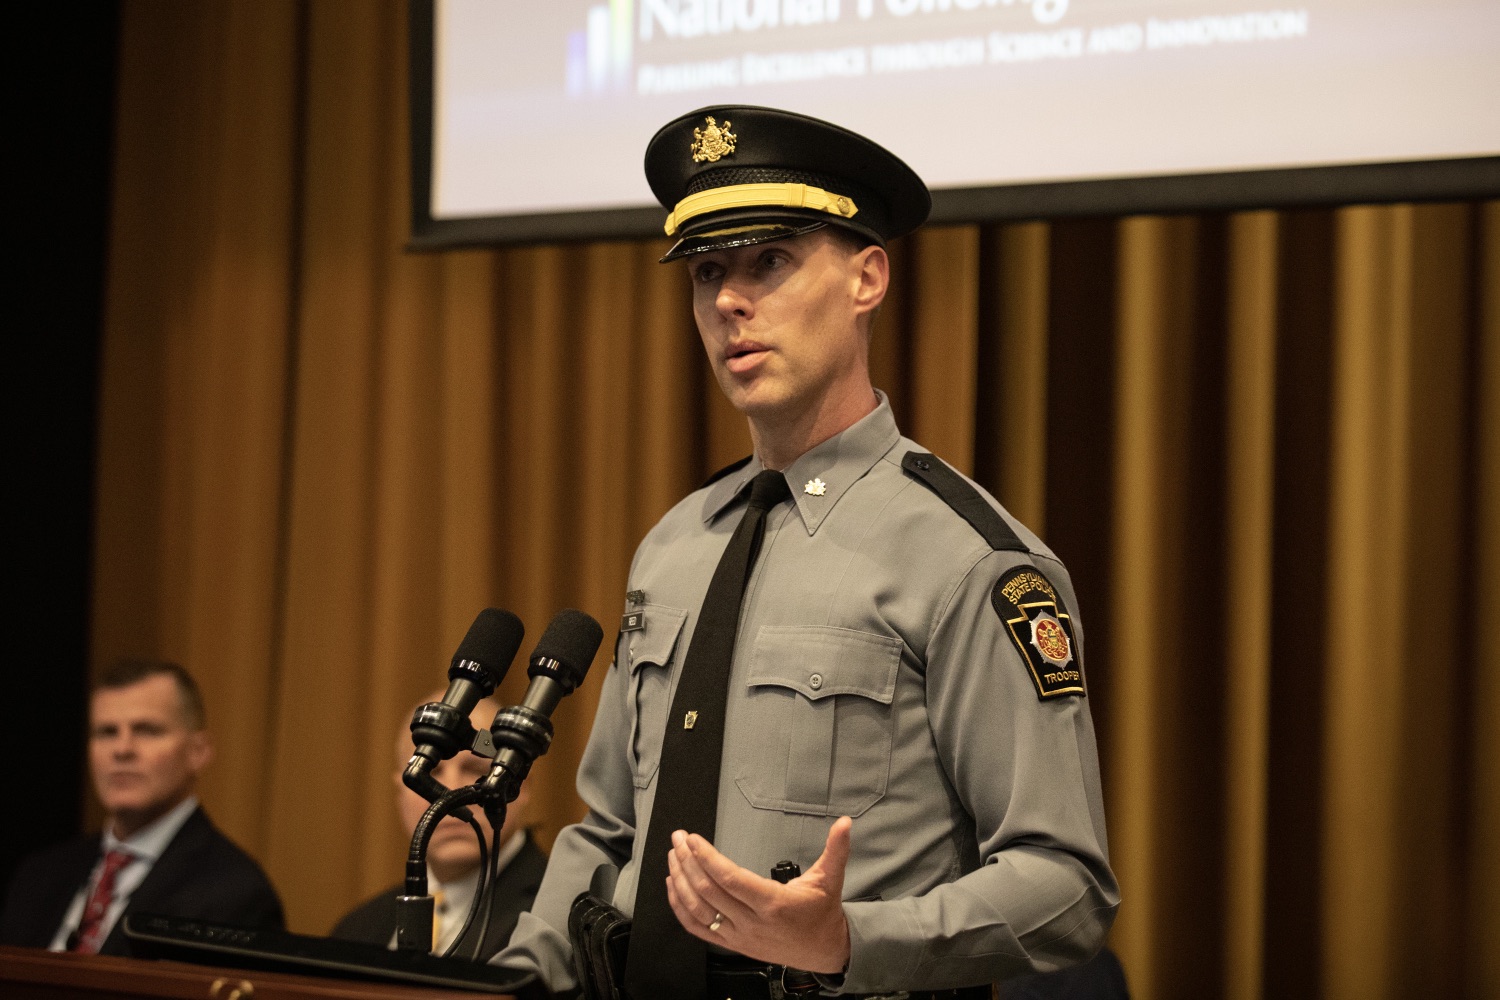 The Pennsylvania State Police joined Dr. Robin Engel of the National Policing Institute to present the 2022 findings of an independent study aimed at improving public safety, transparency, and policy by analyzing data from all traffic stops initiated by troopers. Pictured here is Lieutenant Adam Reed, delivering remarks at the joint press conference in Hershey, Pennsylvania. May 23, 2023.<br><a href="https://filesource.amperwave.net/commonwealthofpa/photo/23152_psp_contactData_JP_06.jpg" target="_blank">⇣ Download Photo</a>